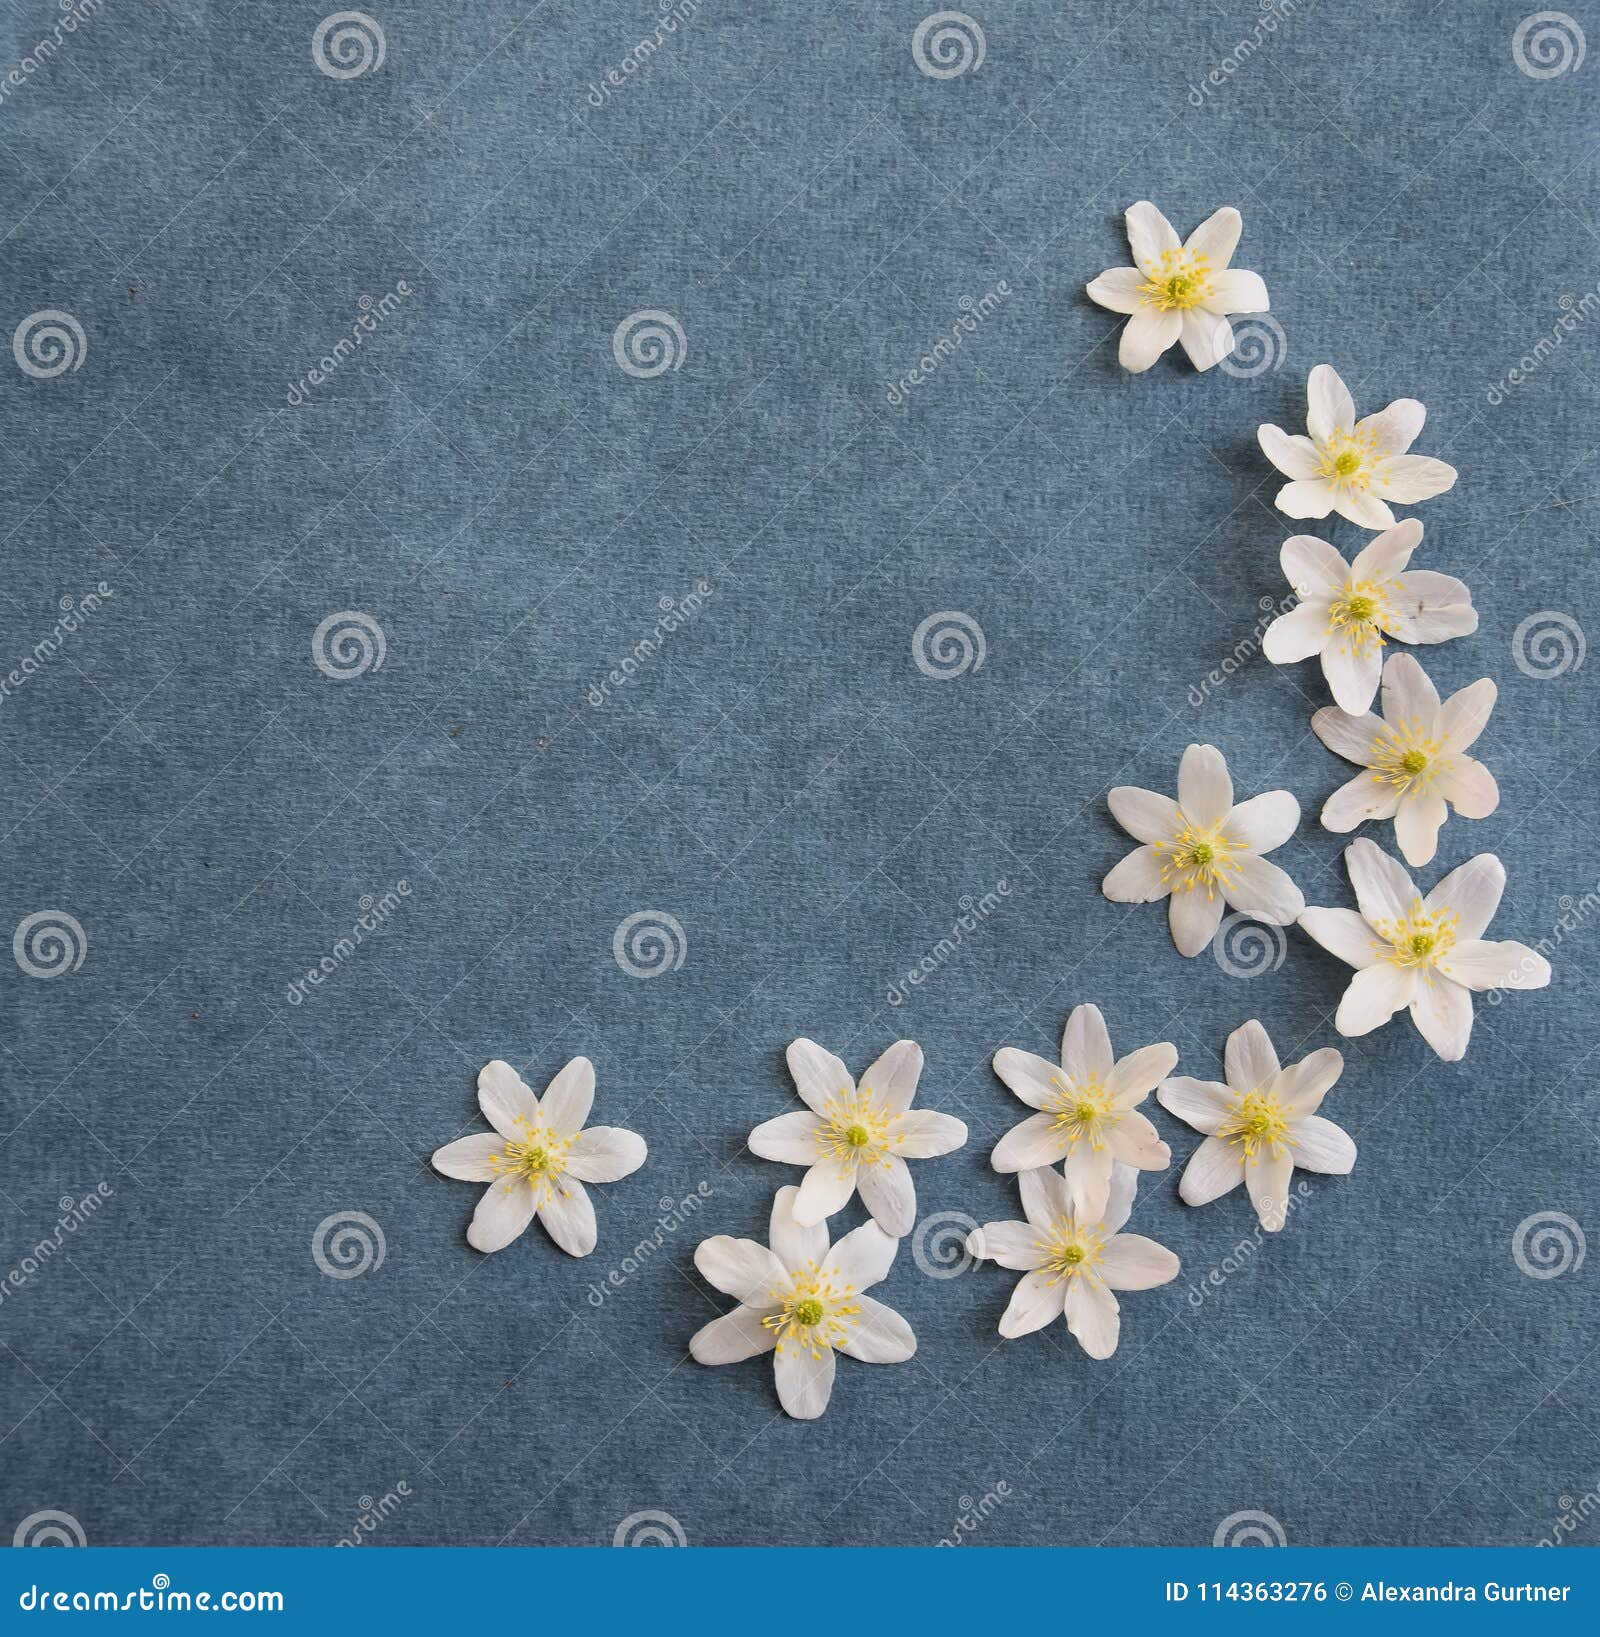 White Wood Anemone Blossoms on Jeans Blue Background Stock Photo - Image of  cardsn, element: 114363276